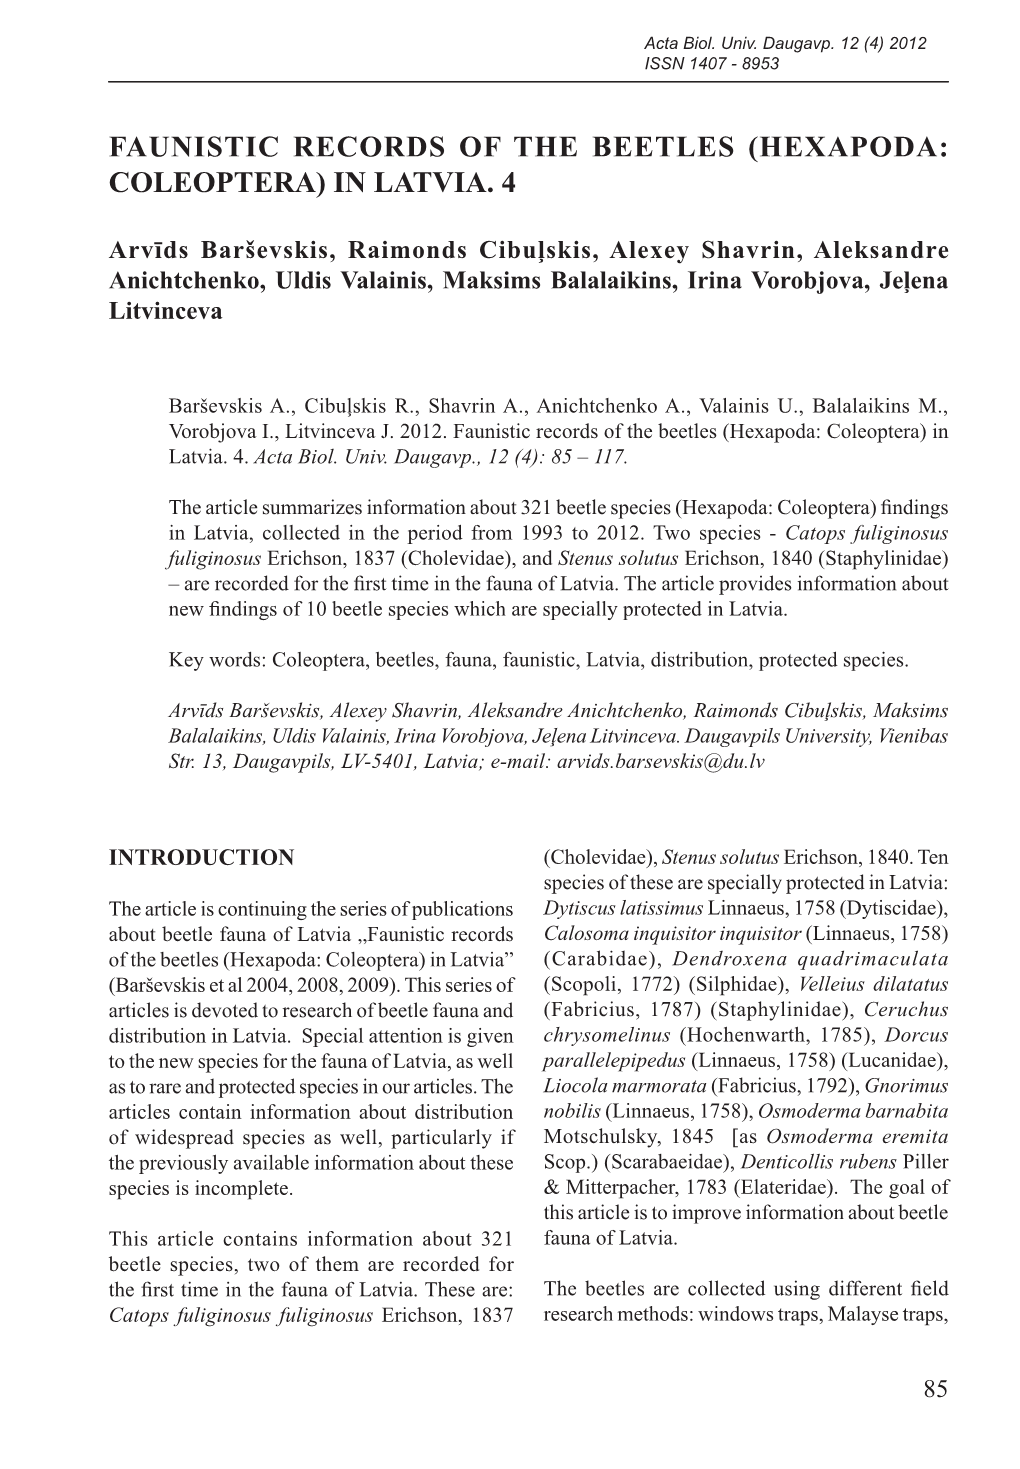 Faunistic Records of the Beetles (Hexapoda: Coleoptera) in Latvia